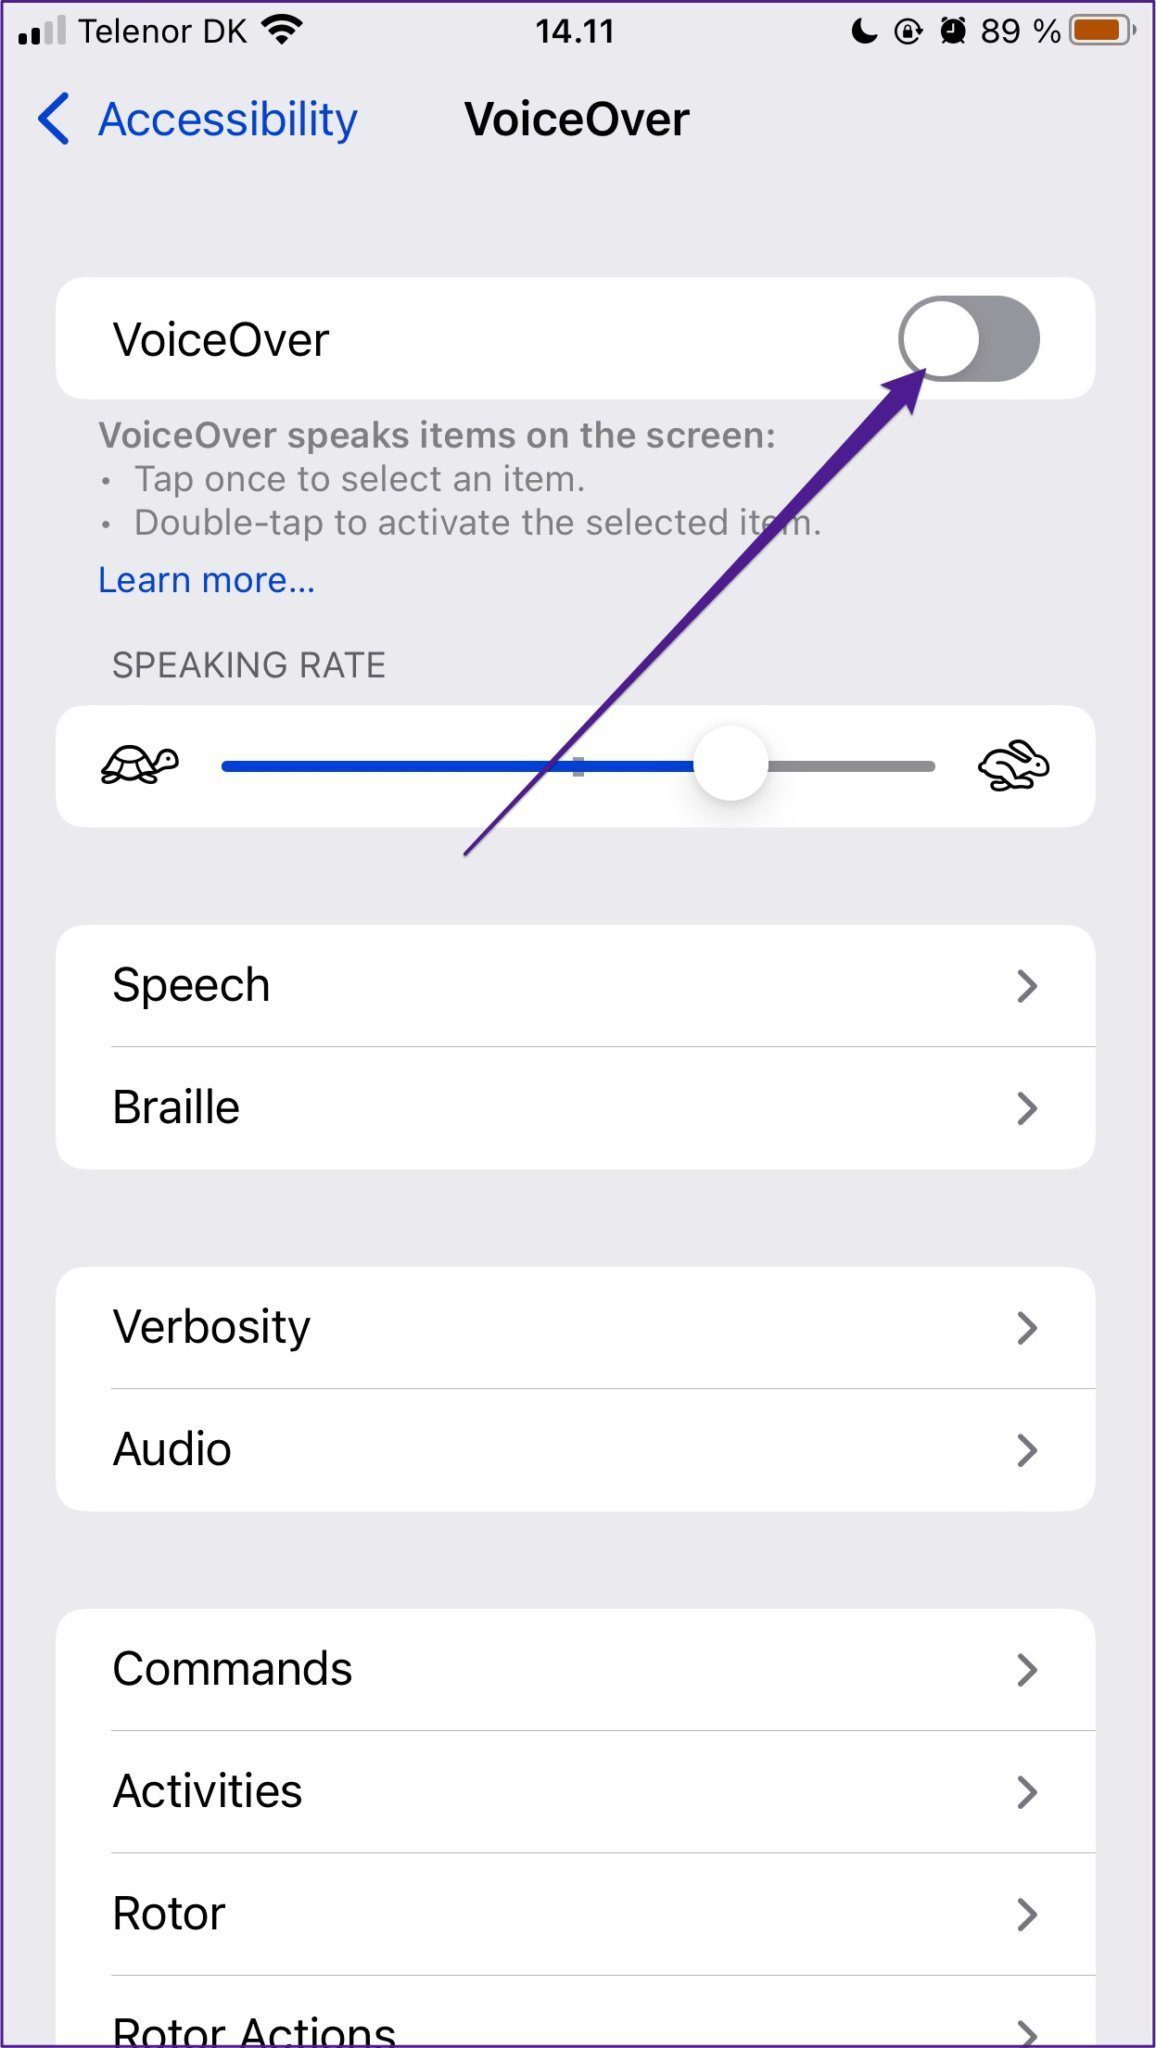 Voiceover toggles